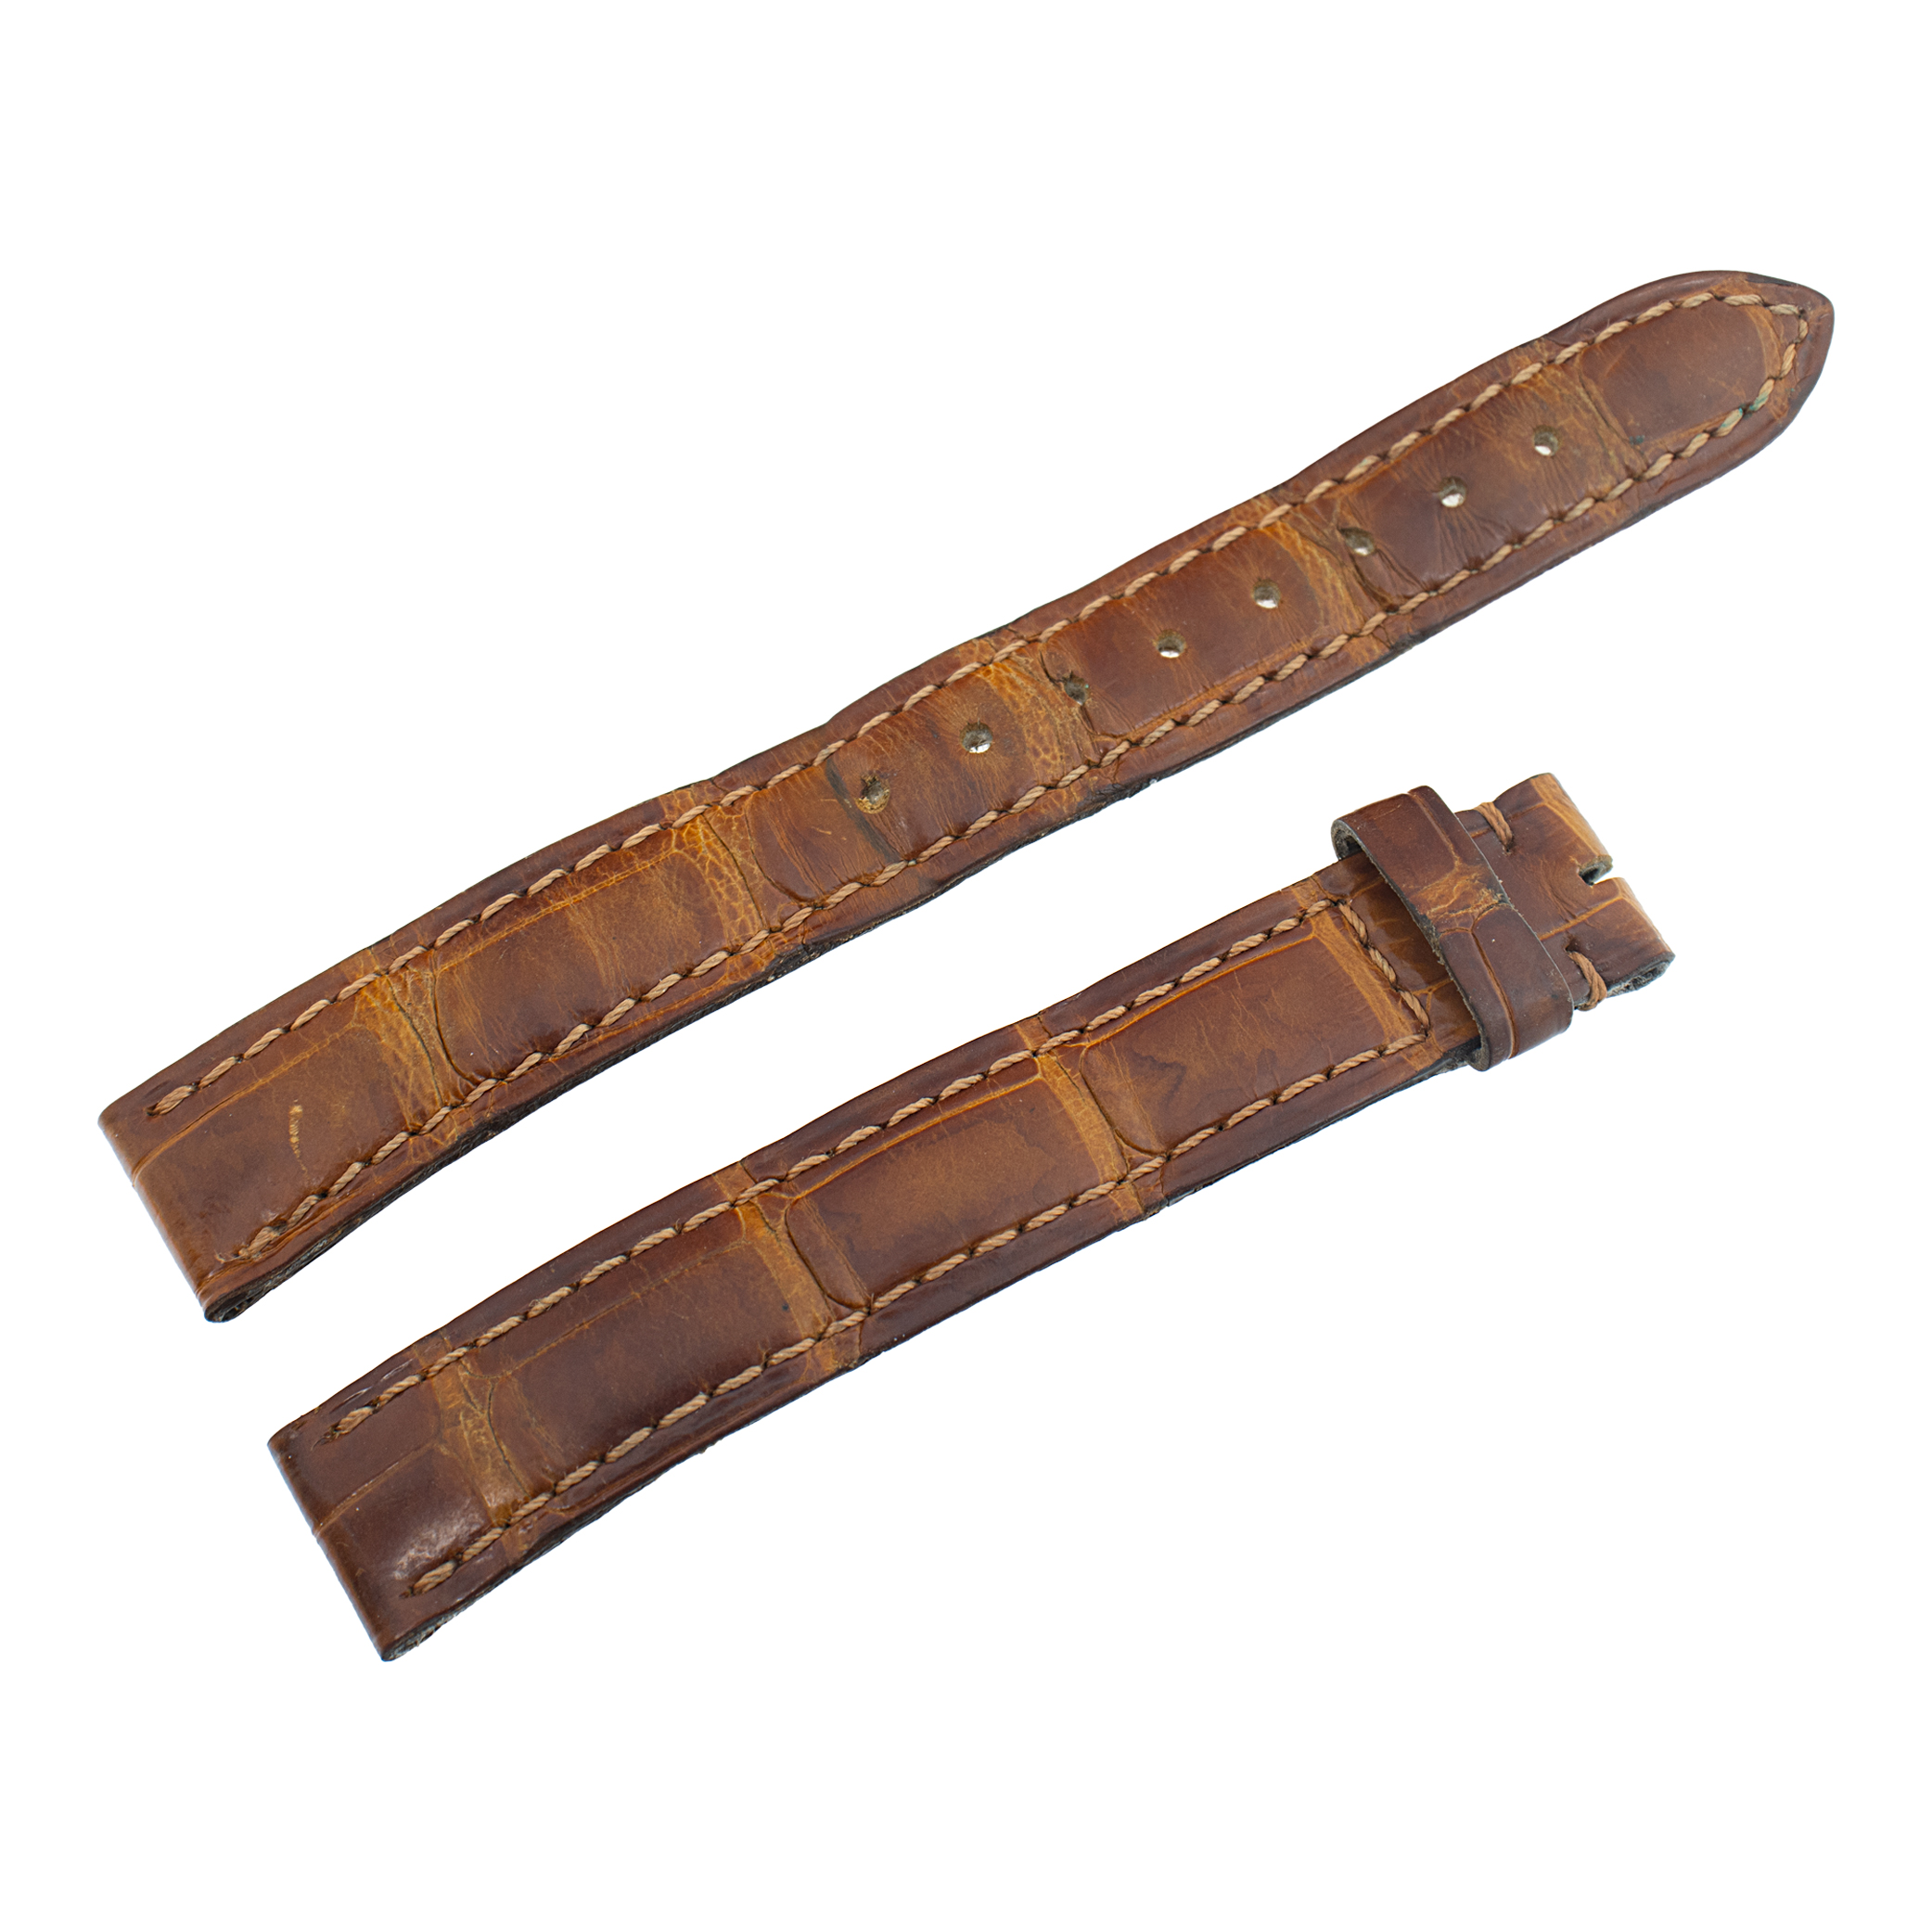 Cartier brown alligator leather strap for tang buckle 13x12 mm. Long end 4 in. Short end  2.9 in